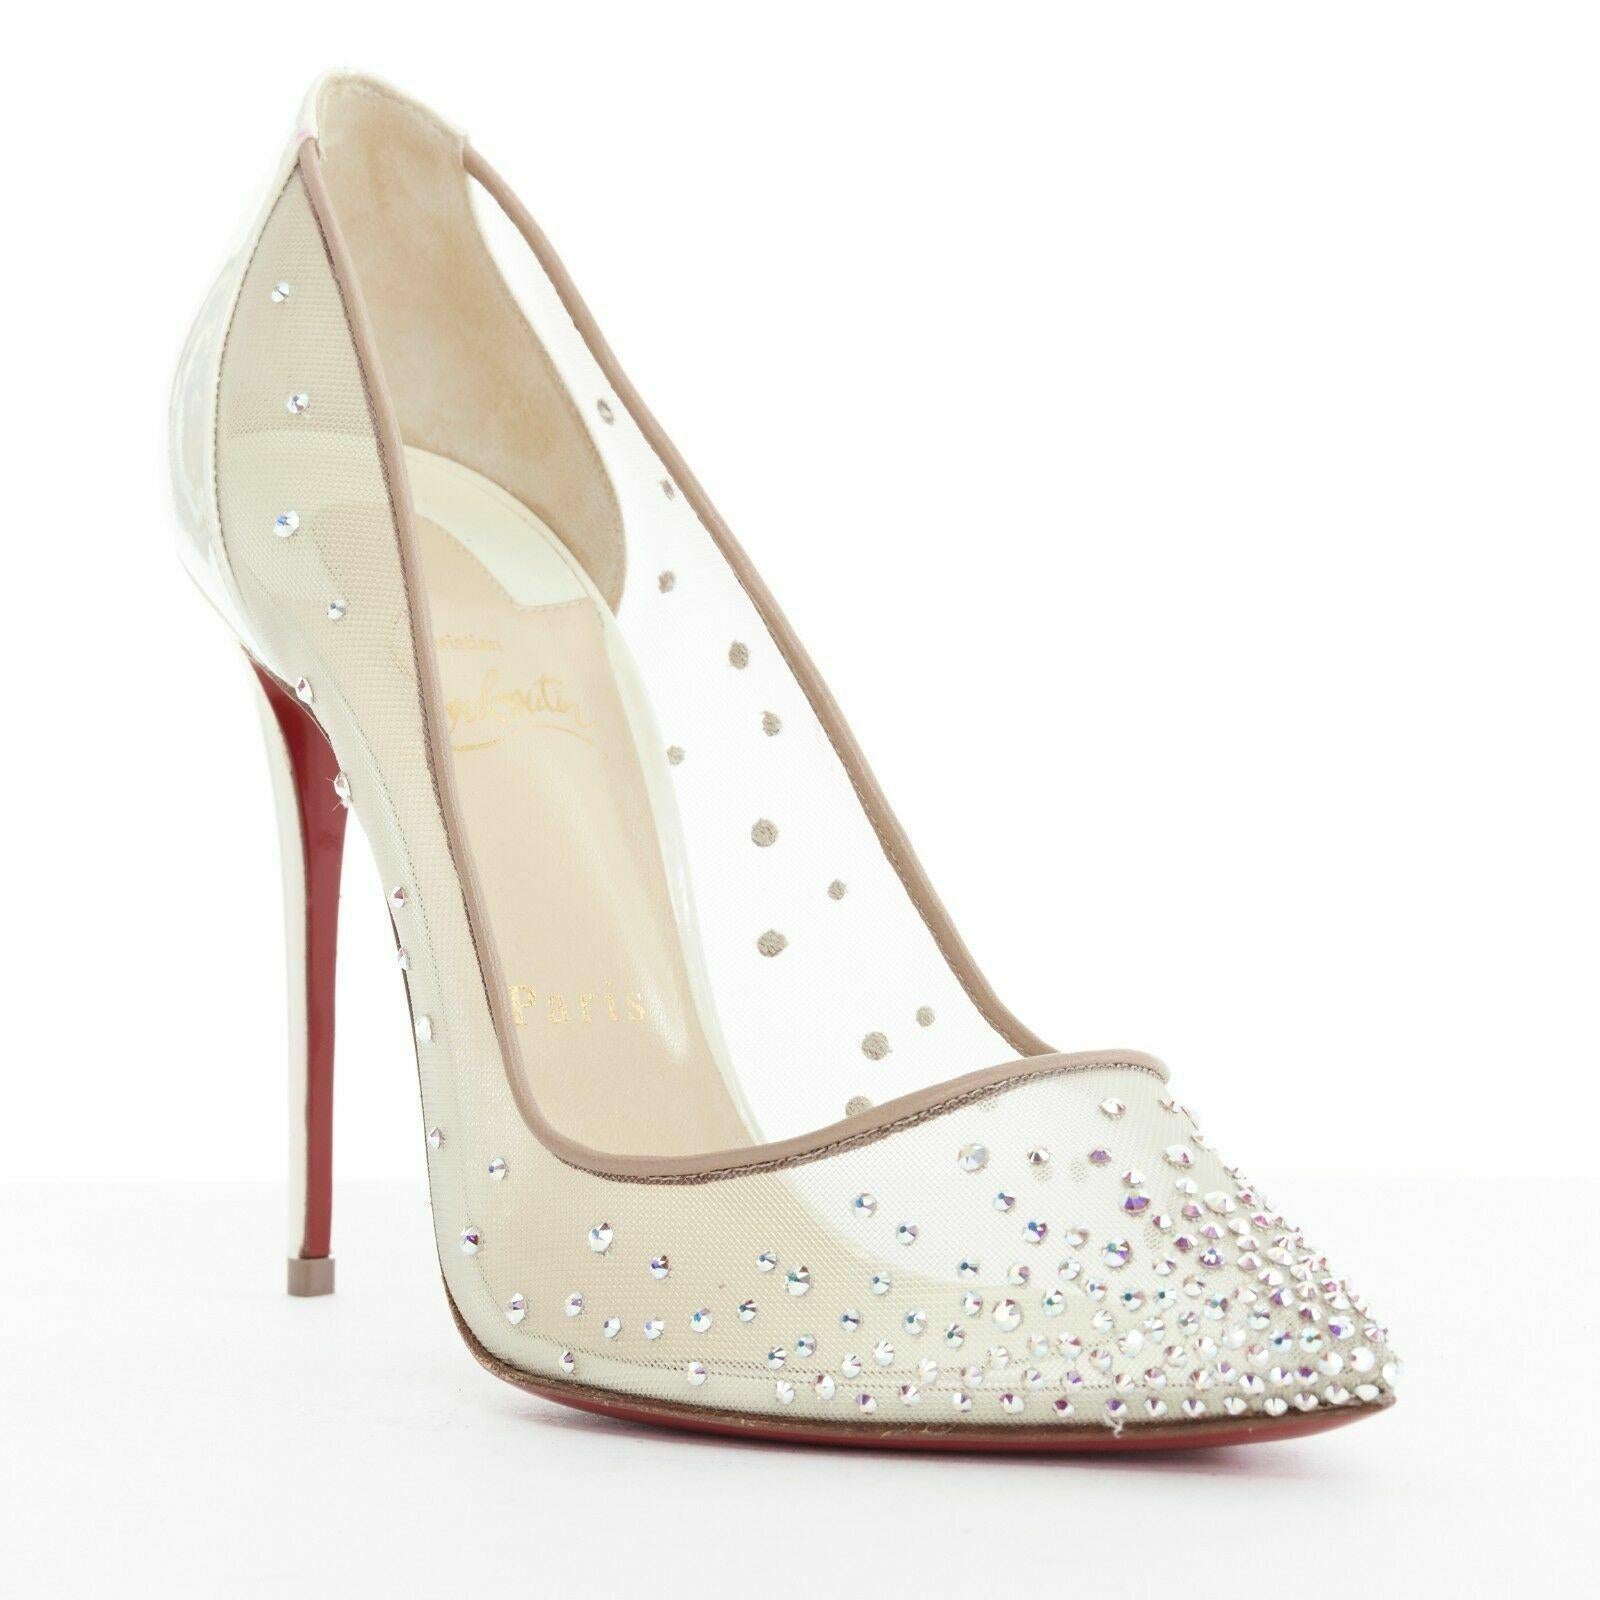 new CHRISTIAN LOUBOUTIN Follies Strass crystal mesh pearl bridal pumps EU41
Brand: Christian Louboutin
Designer: Christian Louboutin
Model Name / Style: Follies Strass
Material: Patent leather
Color: White; pearl iridescent
Pattern: Solid
Extra